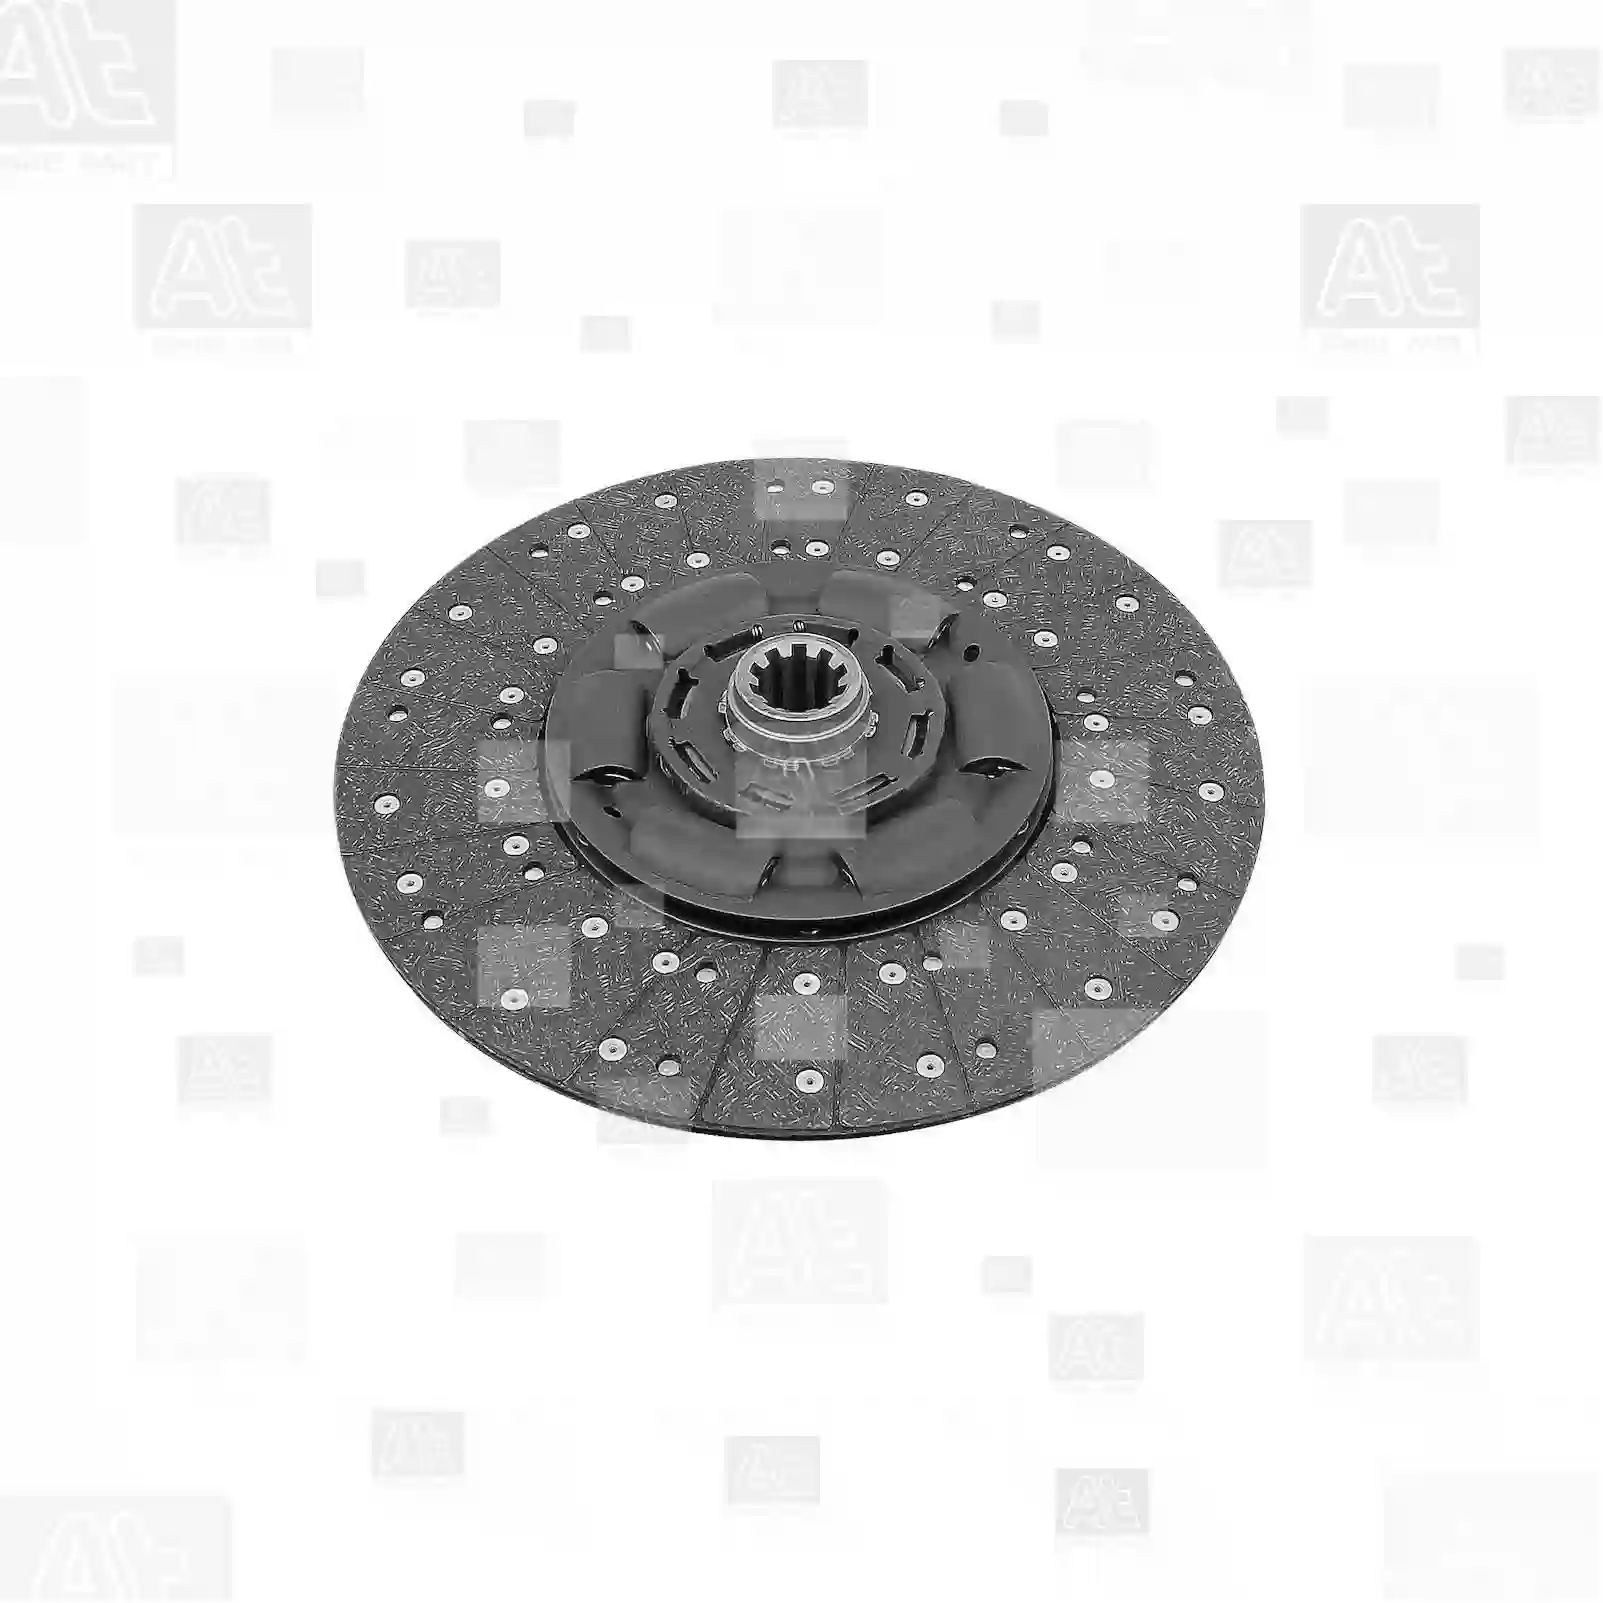 Clutch disc, 77721906, 81303010353, 81303010358, 81303010377, 81303010462, 81303010463, 81303019358, 81303019377, 81303019462, 81303019463, DO16365, 0012503003, 0092501903, 0112503003, 0122505803, 0132501303, 0132501403, 0132501803, 0132502503, 0132502703, 0132504203, 0142509703, 0152503903, 0162500703, 0162500803, 0162501203, 0162501303, 0162502603, 0162502903, 0162504703, 0172508503, 0172509003, 0192500403, 0202507903, 0202508003, 0202508103, 0202509703, 011010005, 042132710, 81303010377, 8383310000, 8383322000, 8383347000C ||  77721906 At Spare Part | Engine, Accelerator Pedal, Camshaft, Connecting Rod, Crankcase, Crankshaft, Cylinder Head, Engine Suspension Mountings, Exhaust Manifold, Exhaust Gas Recirculation, Filter Kits, Flywheel Housing, General Overhaul Kits, Engine, Intake Manifold, Oil Cleaner, Oil Cooler, Oil Filter, Oil Pump, Oil Sump, Piston & Liner, Sensor & Switch, Timing Case, Turbocharger, Cooling System, Belt Tensioner, Coolant Filter, Coolant Pipe, Corrosion Prevention Agent, Drive, Expansion Tank, Fan, Intercooler, Monitors & Gauges, Radiator, Thermostat, V-Belt / Timing belt, Water Pump, Fuel System, Electronical Injector Unit, Feed Pump, Fuel Filter, cpl., Fuel Gauge Sender,  Fuel Line, Fuel Pump, Fuel Tank, Injection Line Kit, Injection Pump, Exhaust System, Clutch & Pedal, Gearbox, Propeller Shaft, Axles, Brake System, Hubs & Wheels, Suspension, Leaf Spring, Universal Parts / Accessories, Steering, Electrical System, Cabin Clutch disc, 77721906, 81303010353, 81303010358, 81303010377, 81303010462, 81303010463, 81303019358, 81303019377, 81303019462, 81303019463, DO16365, 0012503003, 0092501903, 0112503003, 0122505803, 0132501303, 0132501403, 0132501803, 0132502503, 0132502703, 0132504203, 0142509703, 0152503903, 0162500703, 0162500803, 0162501203, 0162501303, 0162502603, 0162502903, 0162504703, 0172508503, 0172509003, 0192500403, 0202507903, 0202508003, 0202508103, 0202509703, 011010005, 042132710, 81303010377, 8383310000, 8383322000, 8383347000C ||  77721906 At Spare Part | Engine, Accelerator Pedal, Camshaft, Connecting Rod, Crankcase, Crankshaft, Cylinder Head, Engine Suspension Mountings, Exhaust Manifold, Exhaust Gas Recirculation, Filter Kits, Flywheel Housing, General Overhaul Kits, Engine, Intake Manifold, Oil Cleaner, Oil Cooler, Oil Filter, Oil Pump, Oil Sump, Piston & Liner, Sensor & Switch, Timing Case, Turbocharger, Cooling System, Belt Tensioner, Coolant Filter, Coolant Pipe, Corrosion Prevention Agent, Drive, Expansion Tank, Fan, Intercooler, Monitors & Gauges, Radiator, Thermostat, V-Belt / Timing belt, Water Pump, Fuel System, Electronical Injector Unit, Feed Pump, Fuel Filter, cpl., Fuel Gauge Sender,  Fuel Line, Fuel Pump, Fuel Tank, Injection Line Kit, Injection Pump, Exhaust System, Clutch & Pedal, Gearbox, Propeller Shaft, Axles, Brake System, Hubs & Wheels, Suspension, Leaf Spring, Universal Parts / Accessories, Steering, Electrical System, Cabin